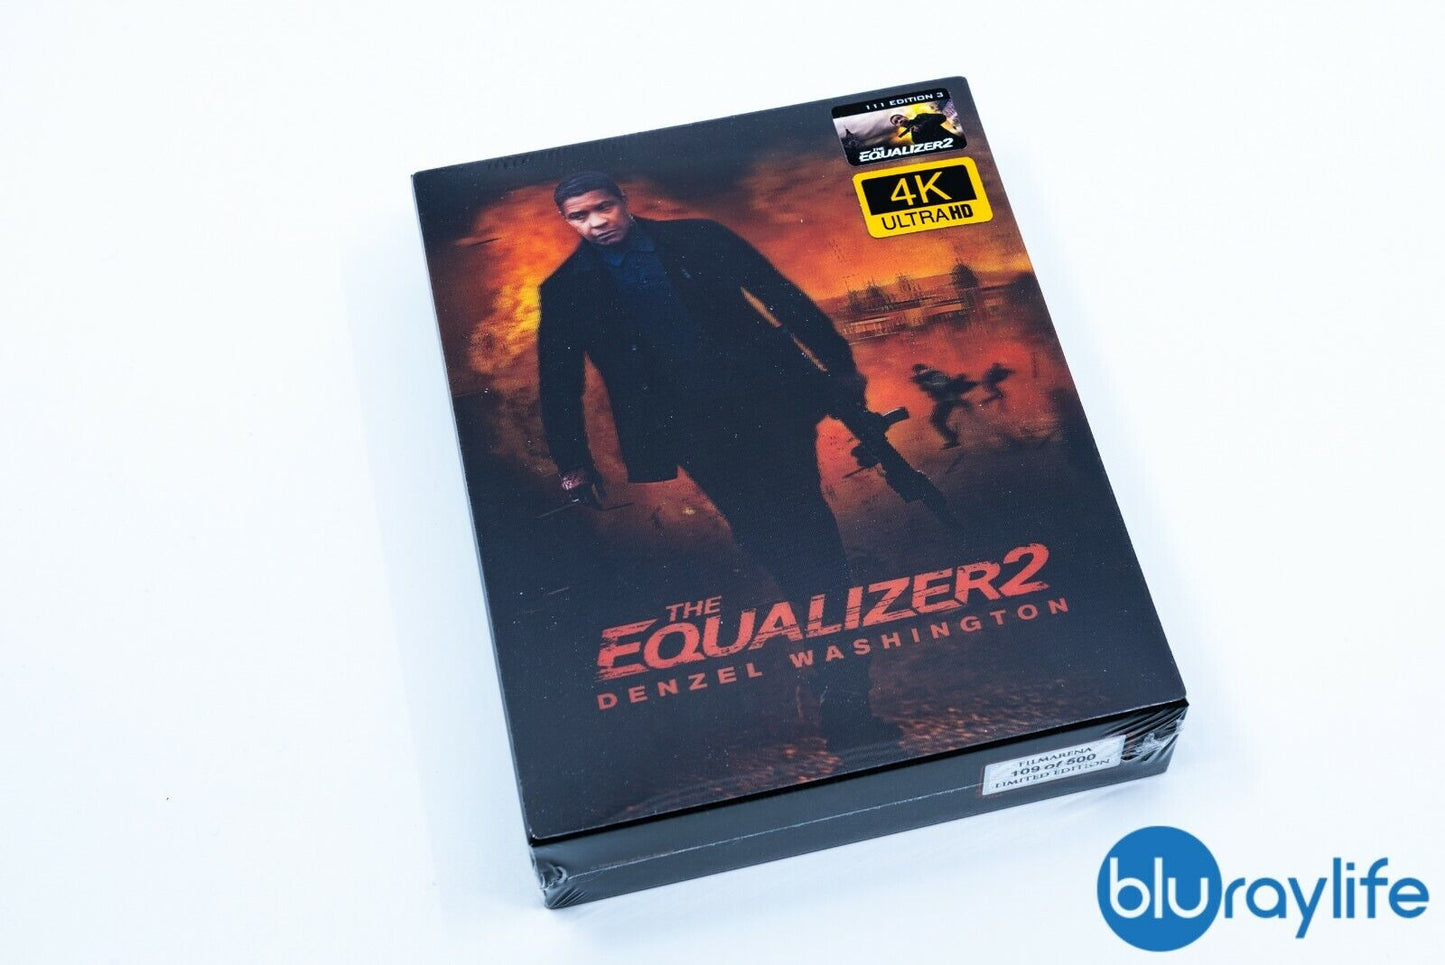 The Equalizer 2 Blu-ray Steelbook Filmarena Collection #111 E3 Lenticular XL Full Slip